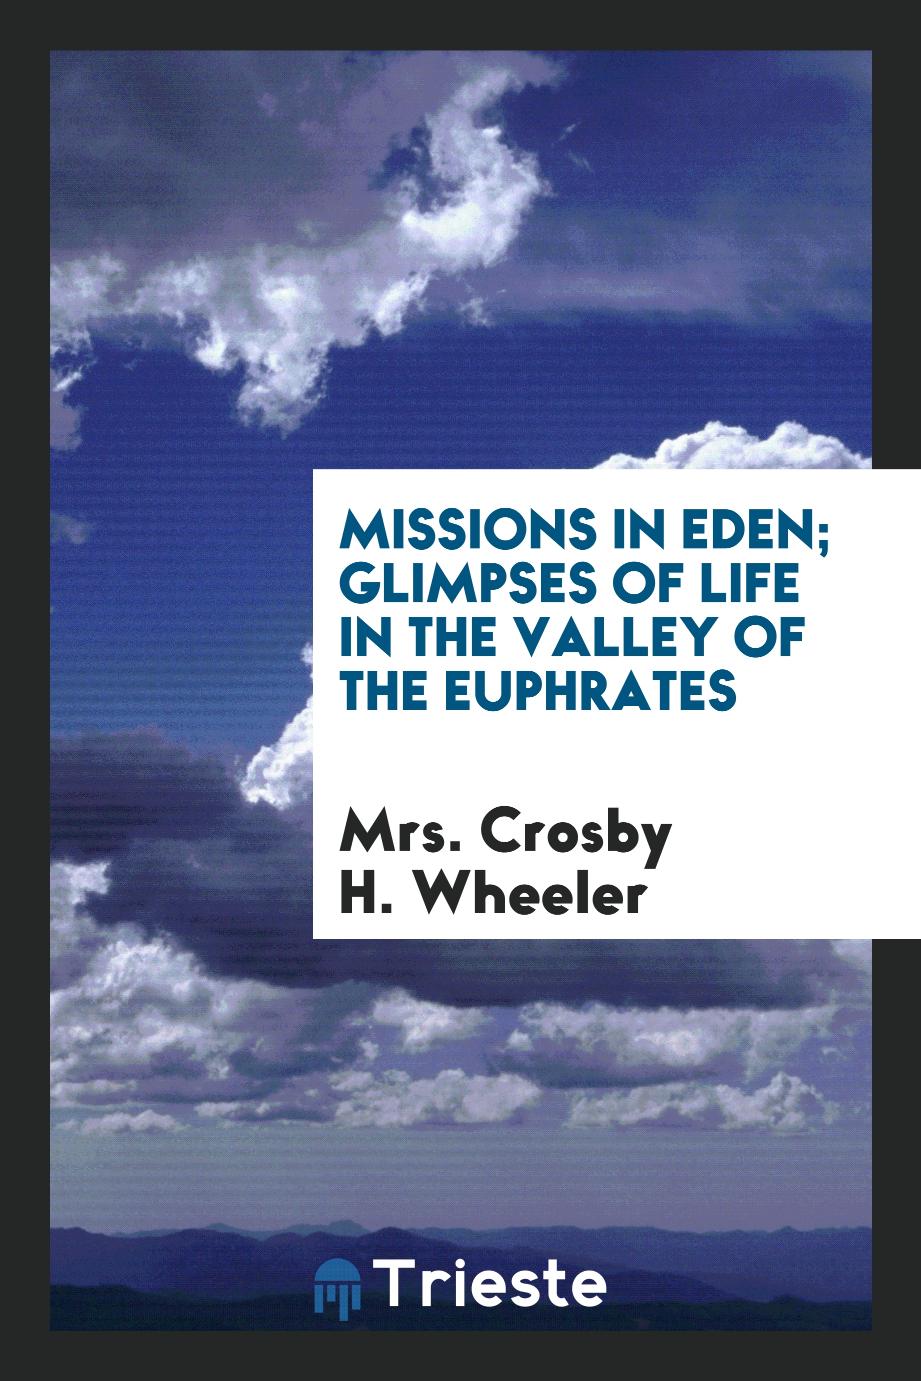 Missions in Eden; glimpses of life in the valley of the Euphrates